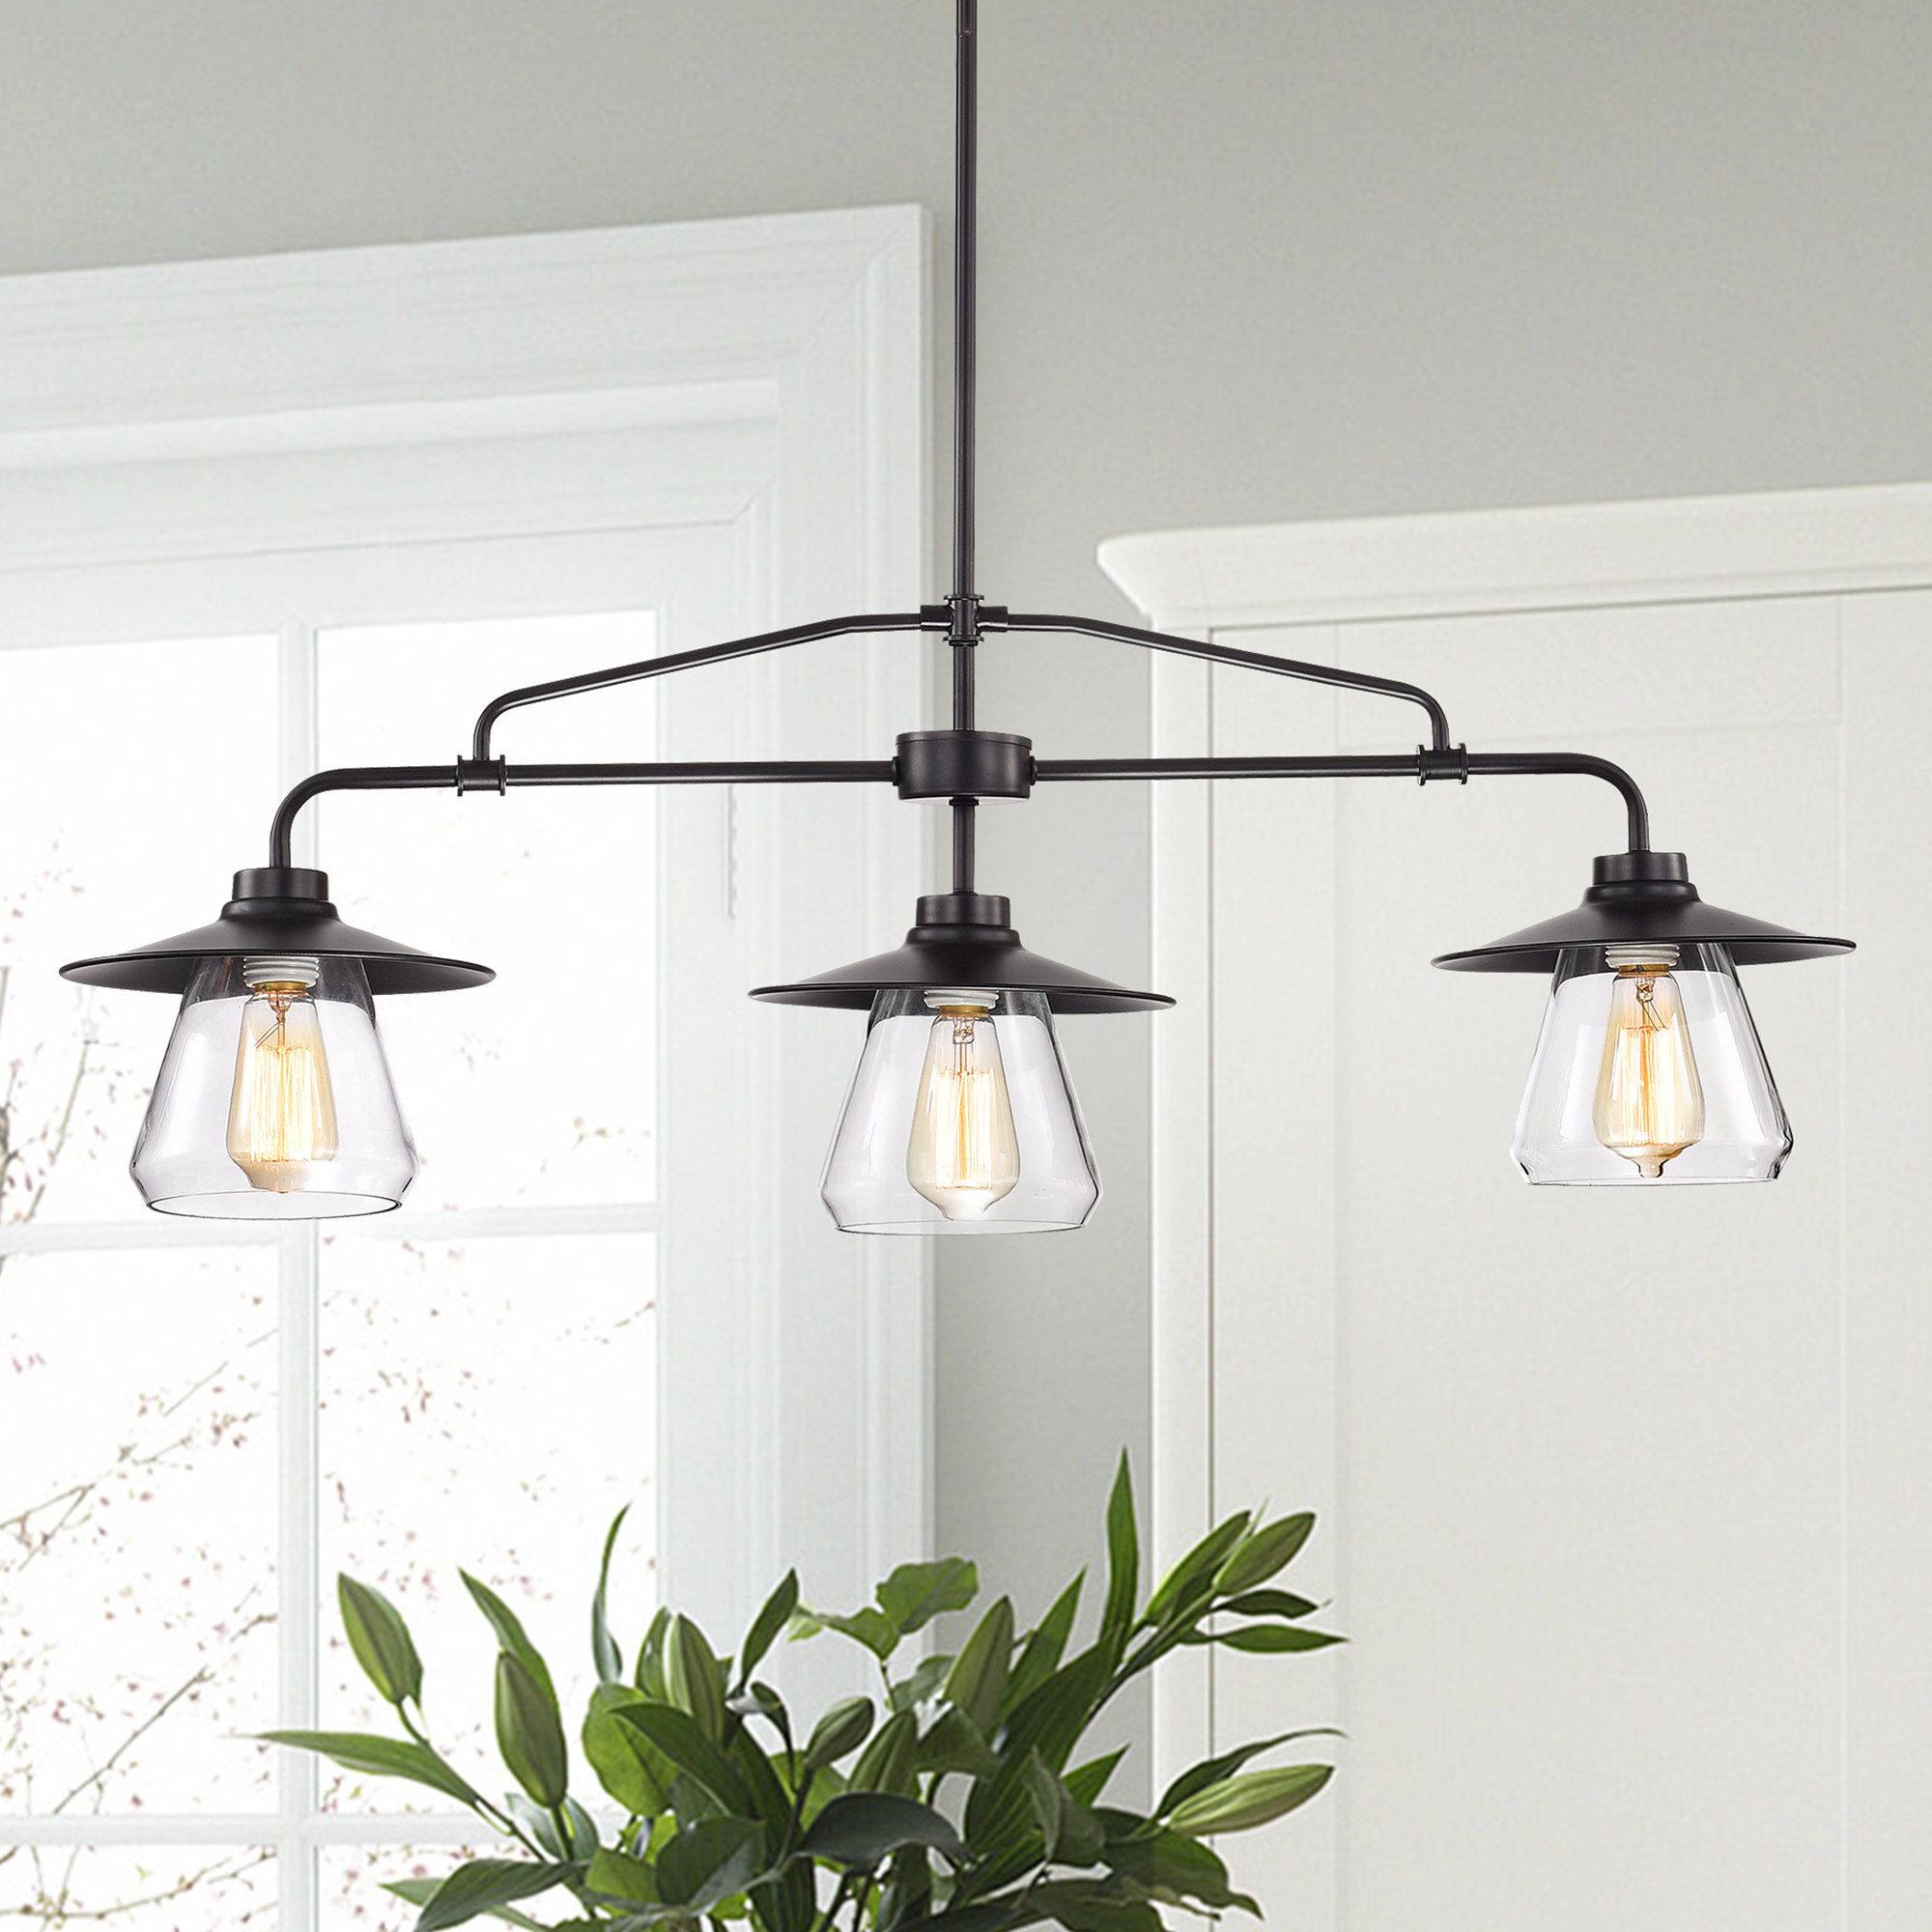 Martinique 3 Light Kitchen Island Dome Pendants In Most Current Kitchen Island Pendant Lighting Fixtures – Gnubies (View 17 of 25)